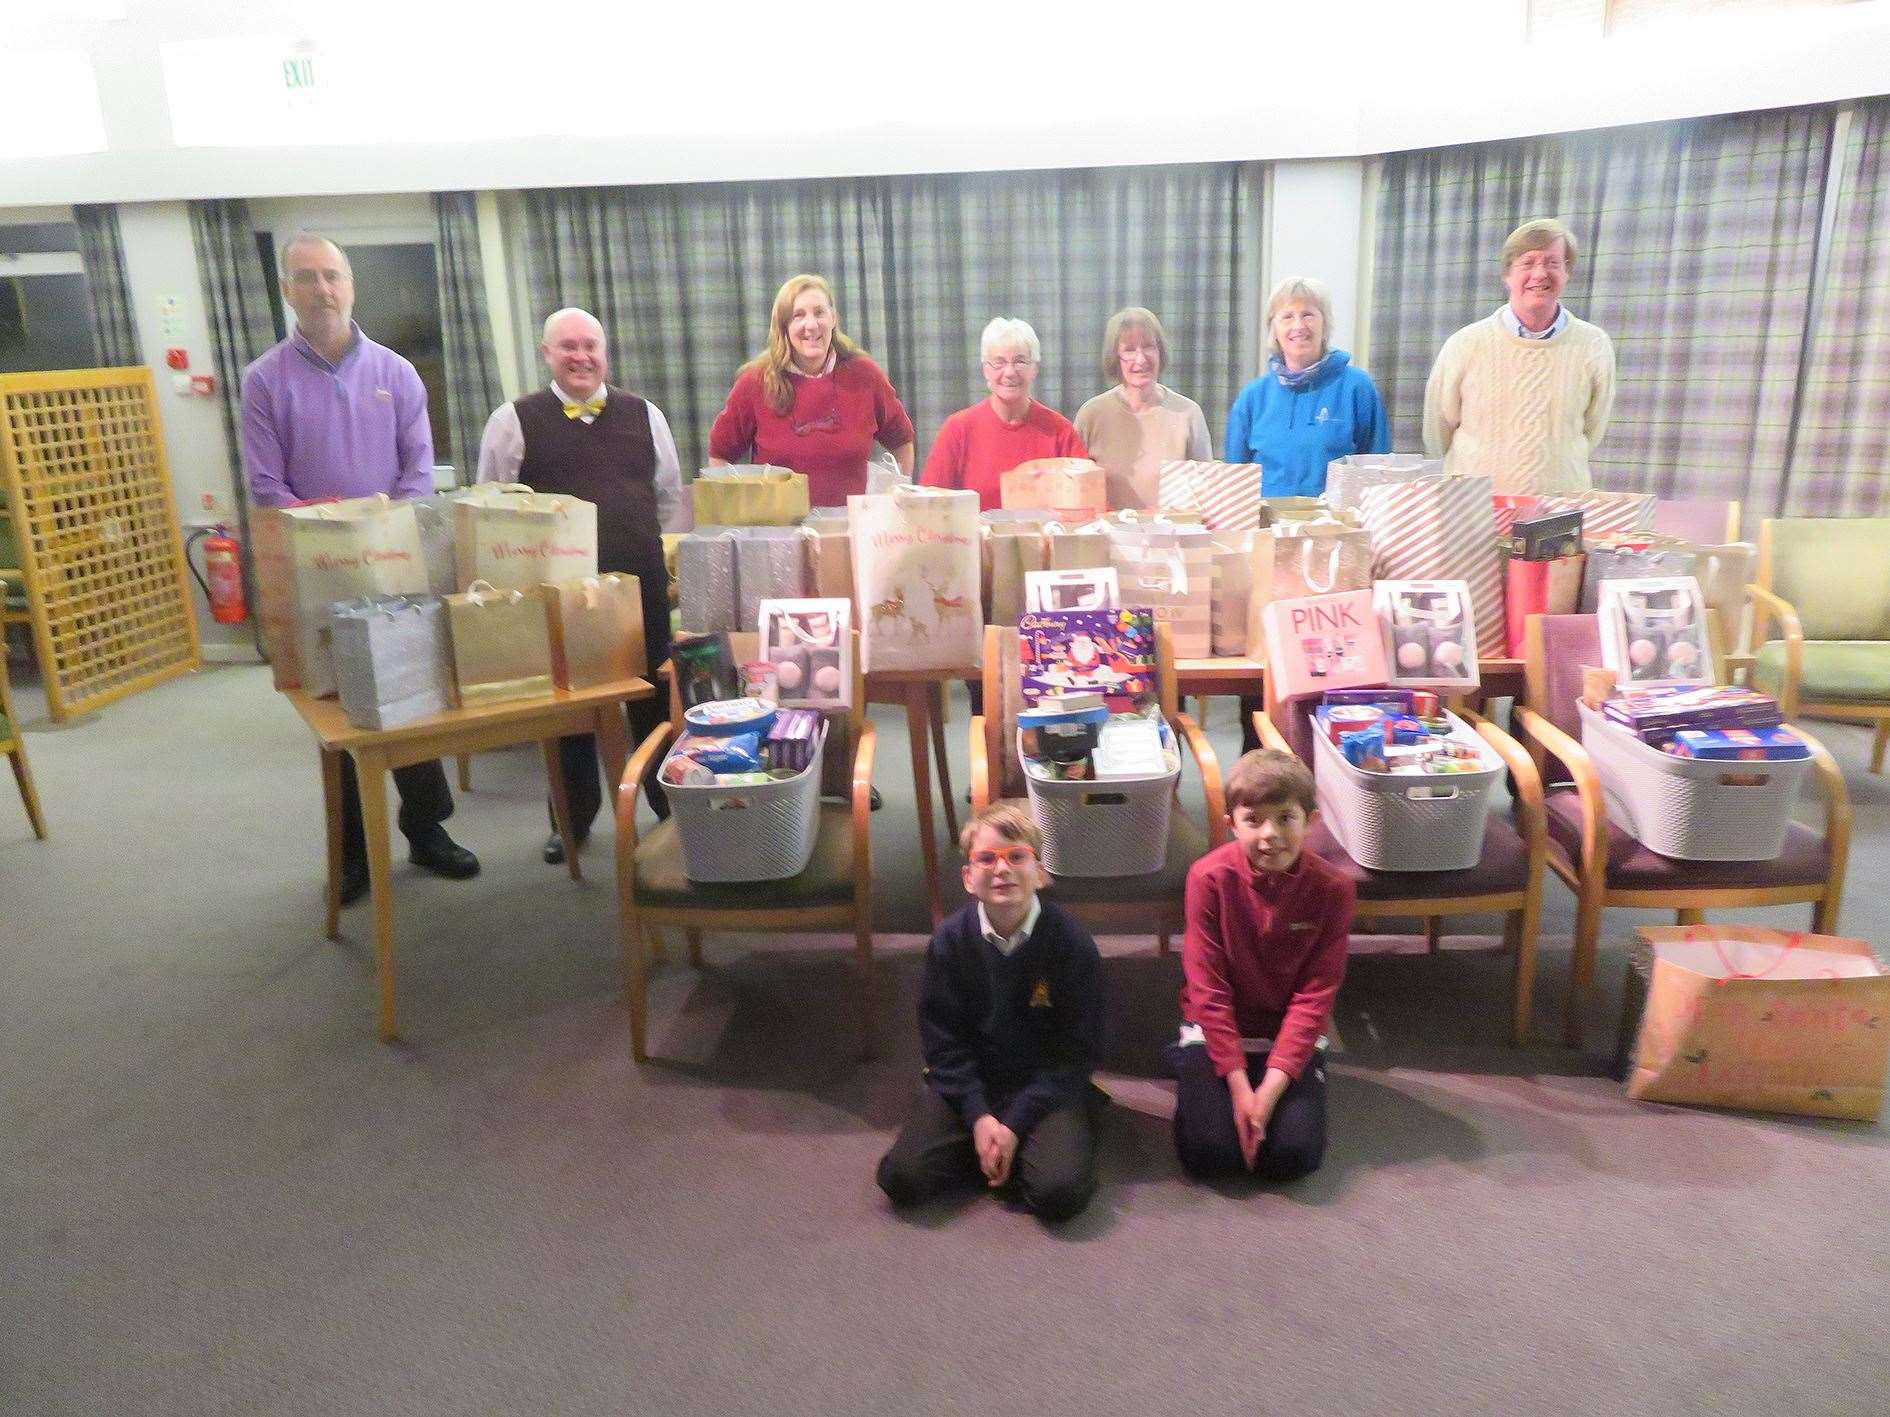 A productive evening was spent wrapping Christmas presents and filling around 70 gift bags, adults from left, Tony Gill, Simon Scott, Elizabeth Sweetman, Linda Graham, Isobel Murray, Angela Grant and John Sterrett.